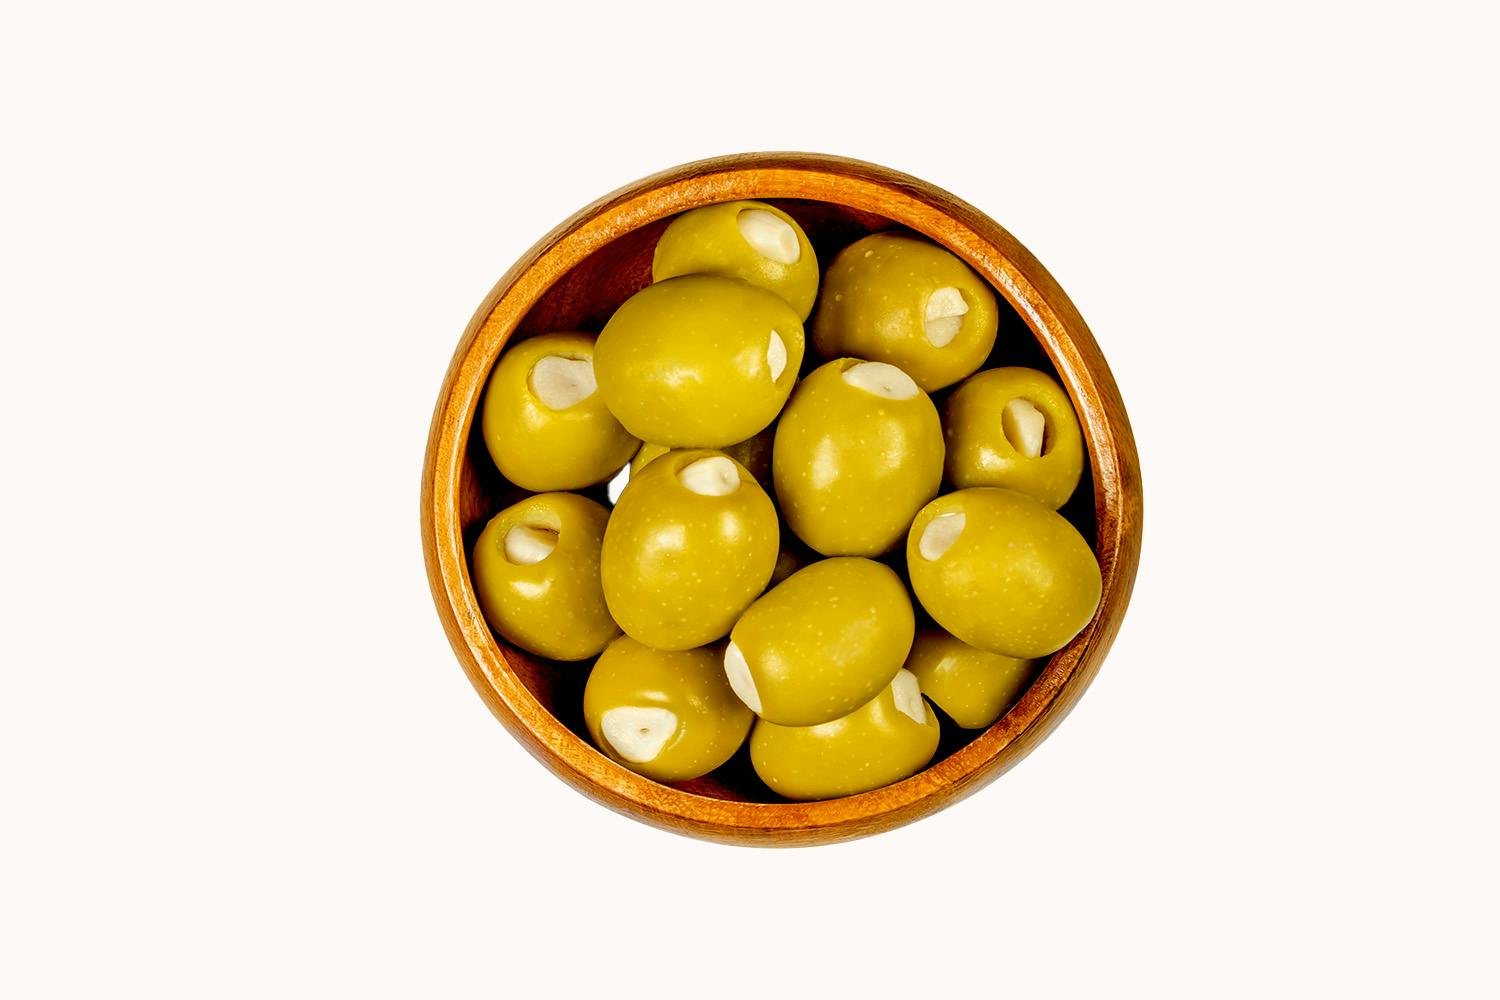 Green Olives Stuffed With Garlic Cloves